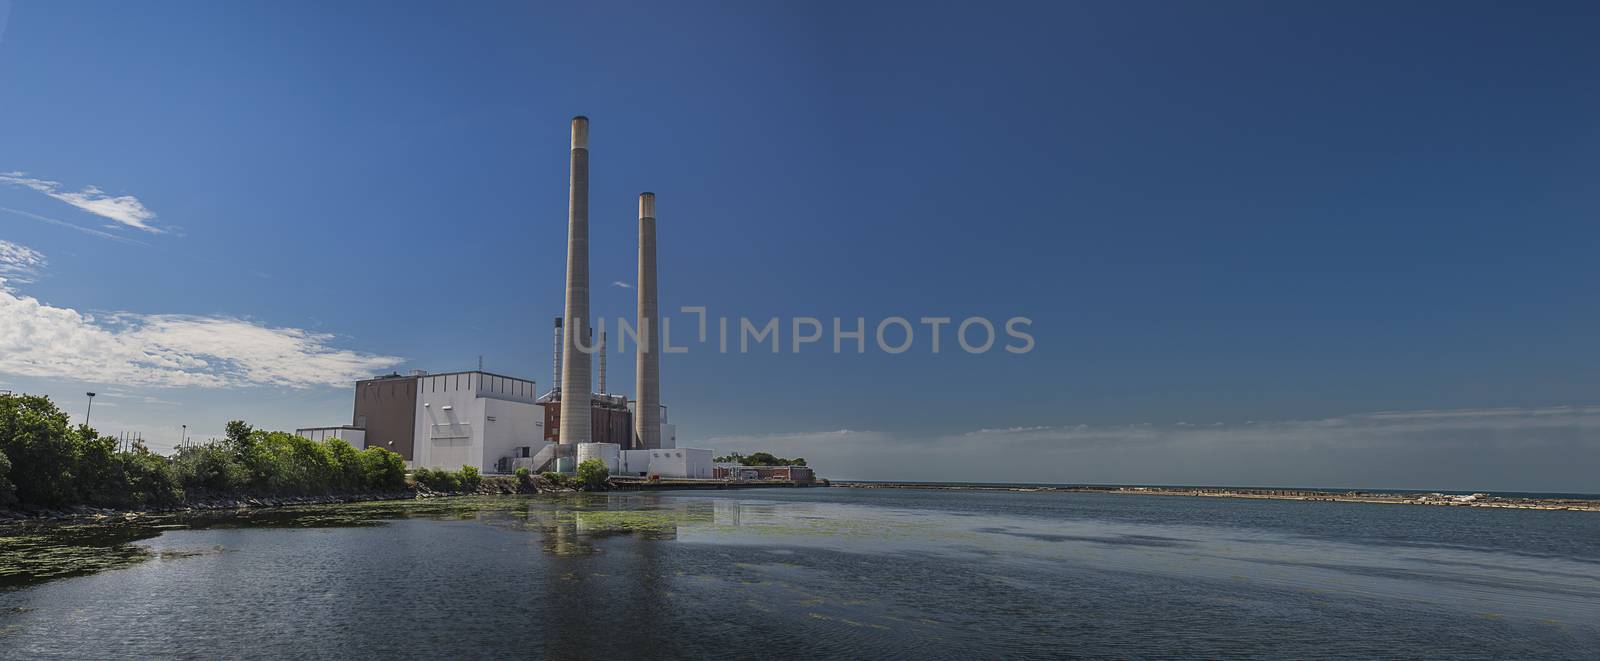 Power plant by the water by mypstudio